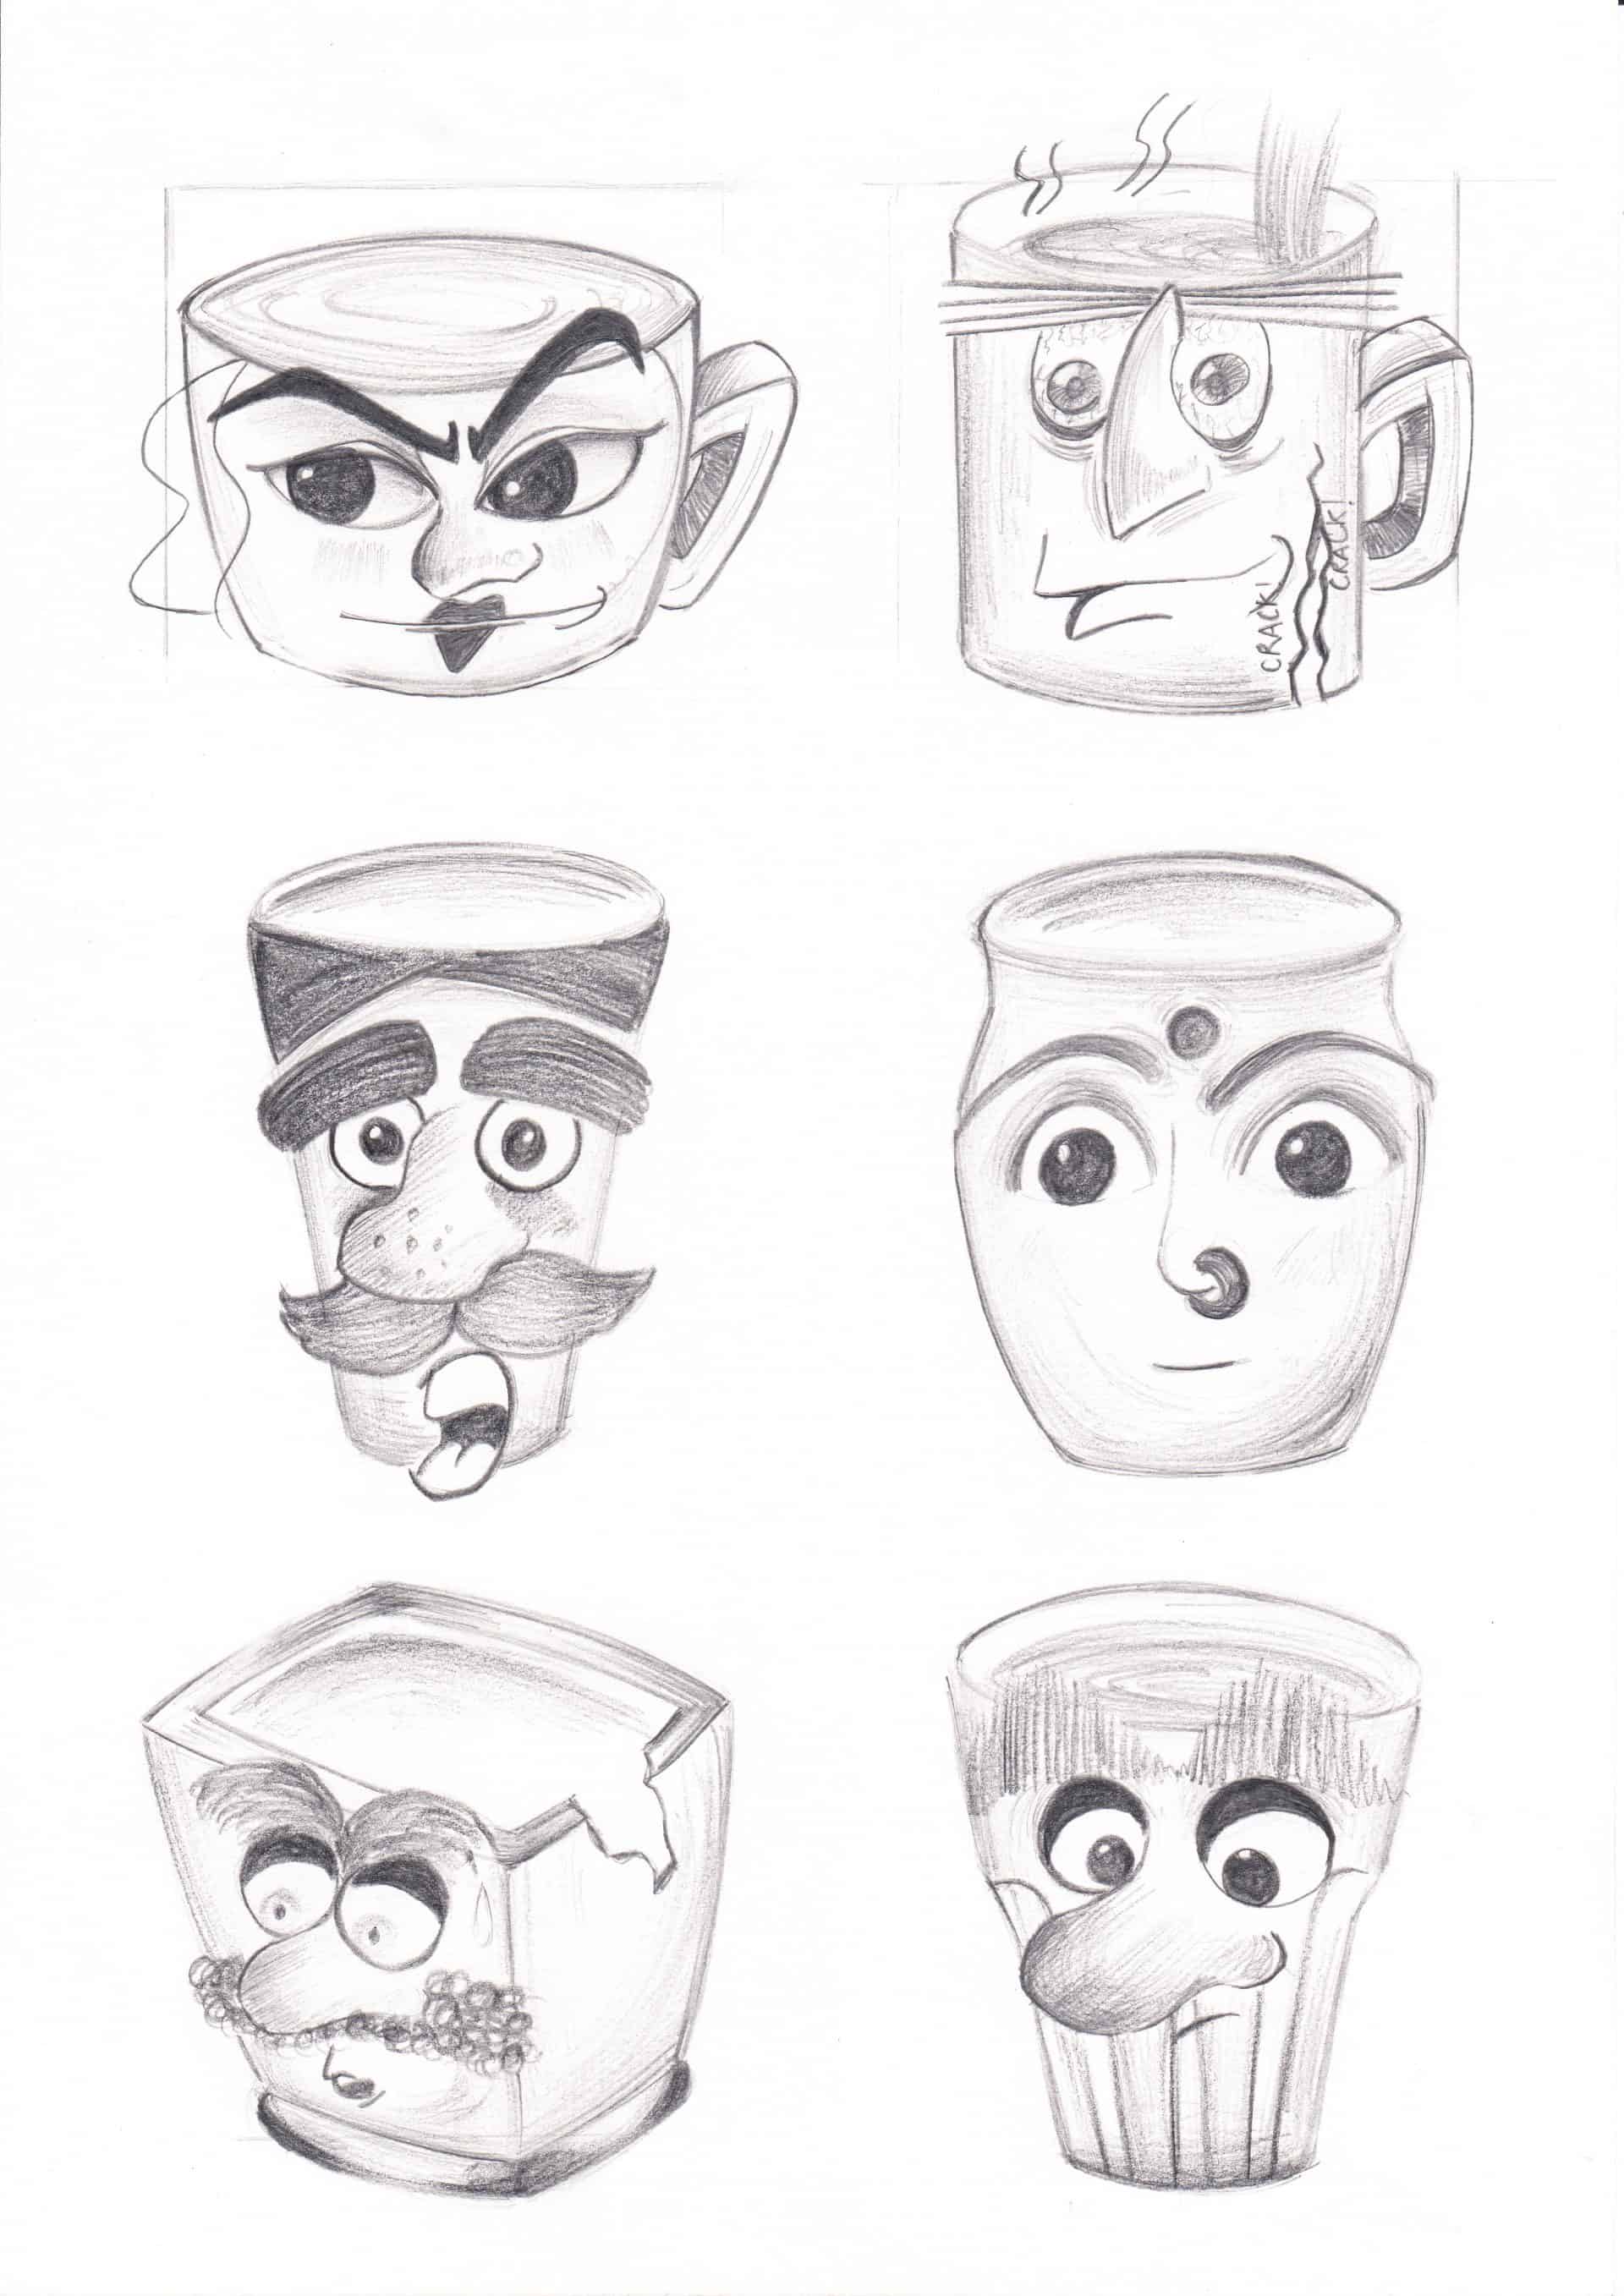 Characterisation of Cups